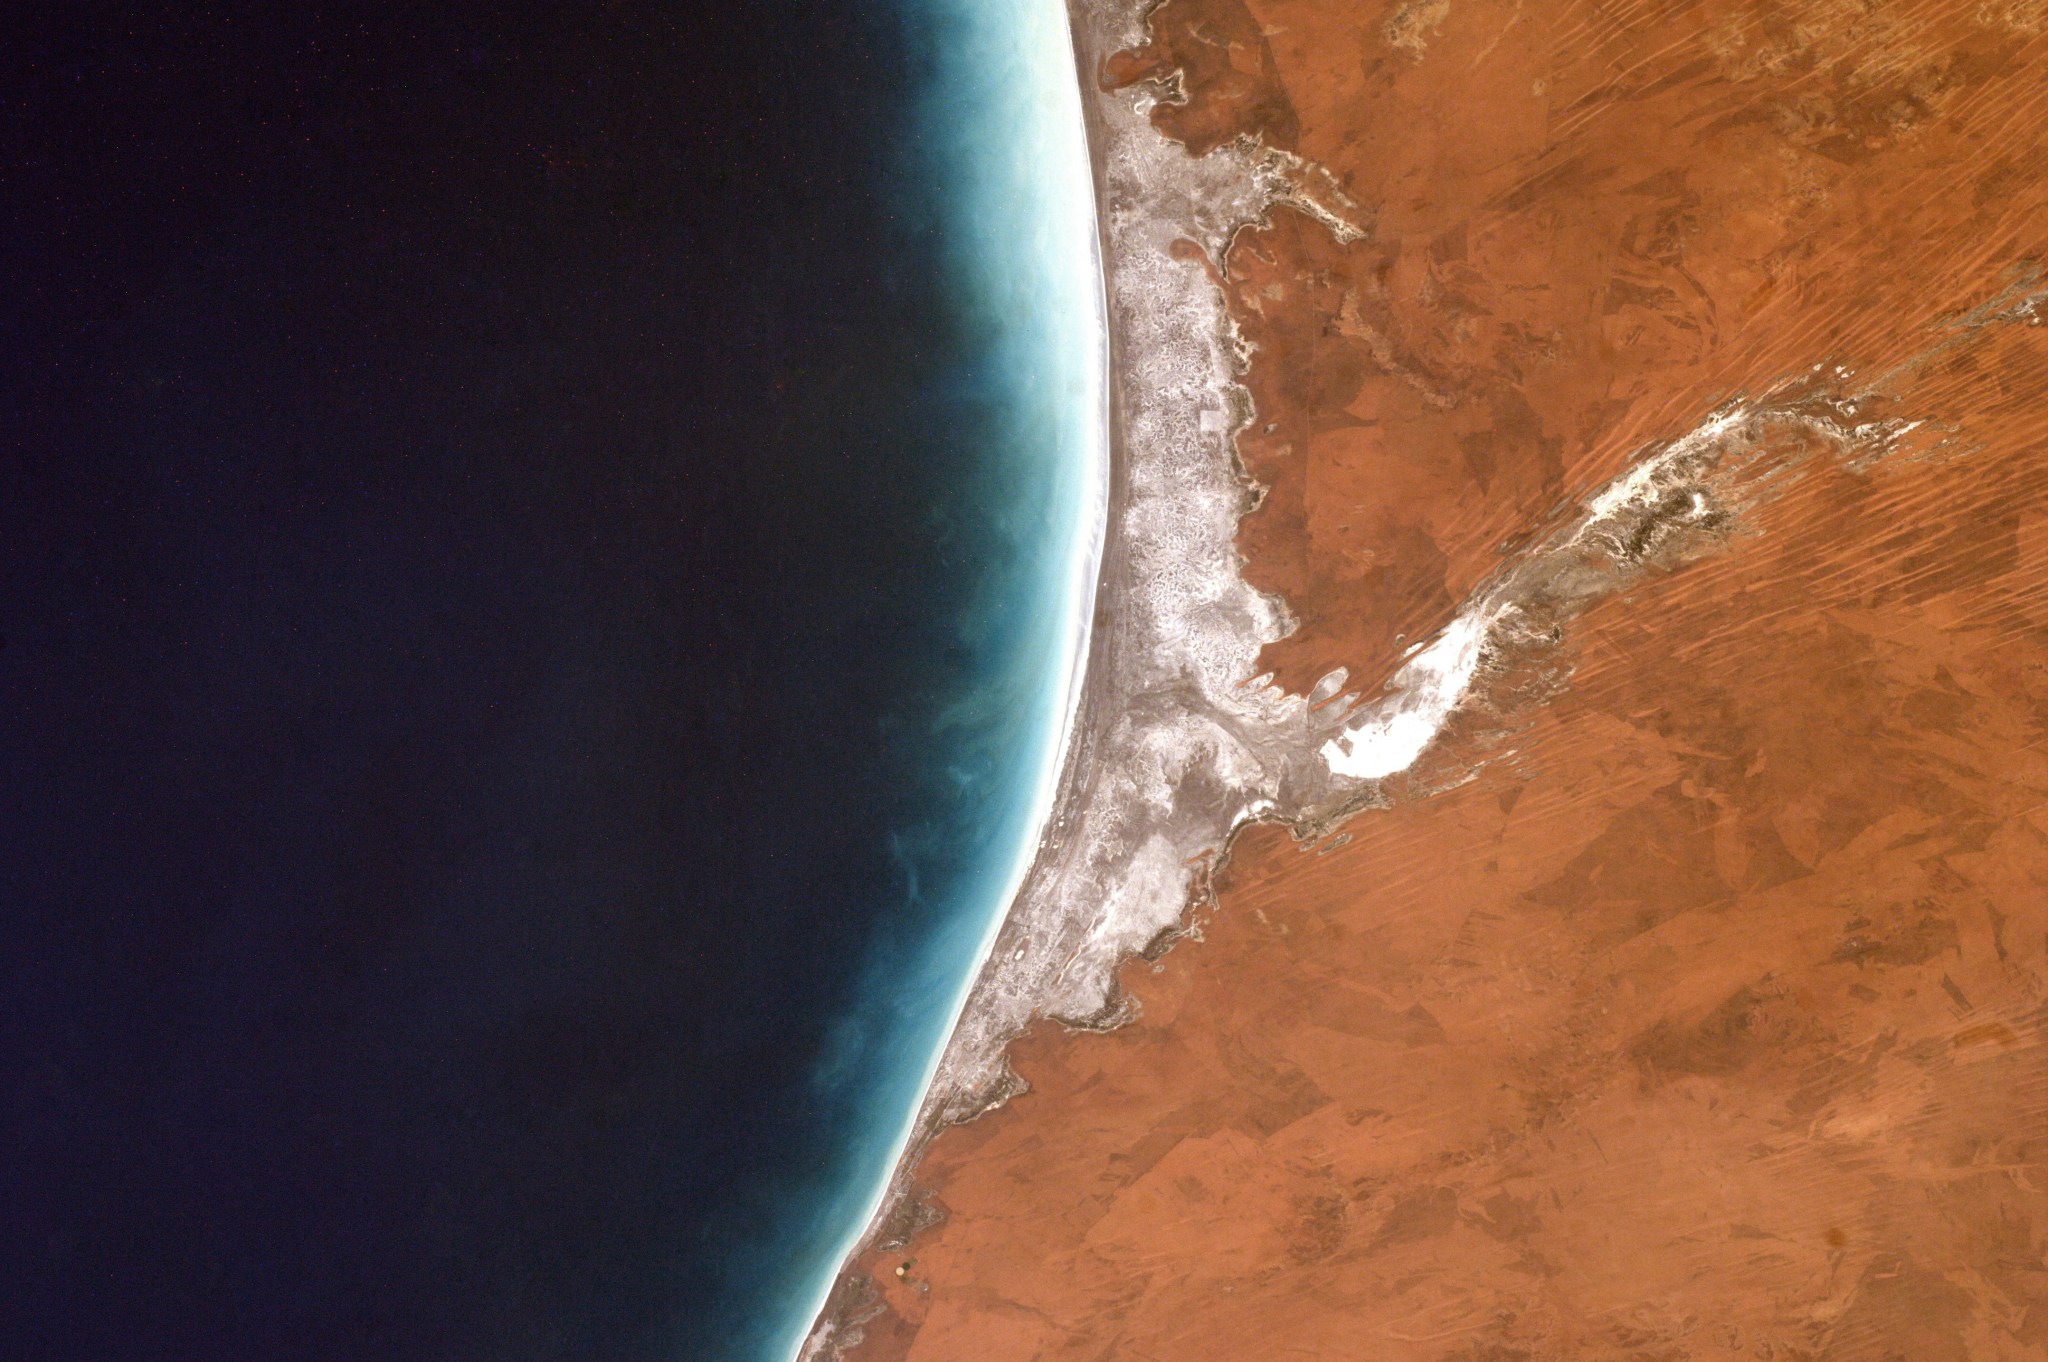 Taken from the International Space Station (ISS) by the EarthKAM camera, this nadir (straight-down) photograph shows Australia’s famed Eighty Mile Beach. Despite its name, the beach is 140 miles (220 kilometers) long.